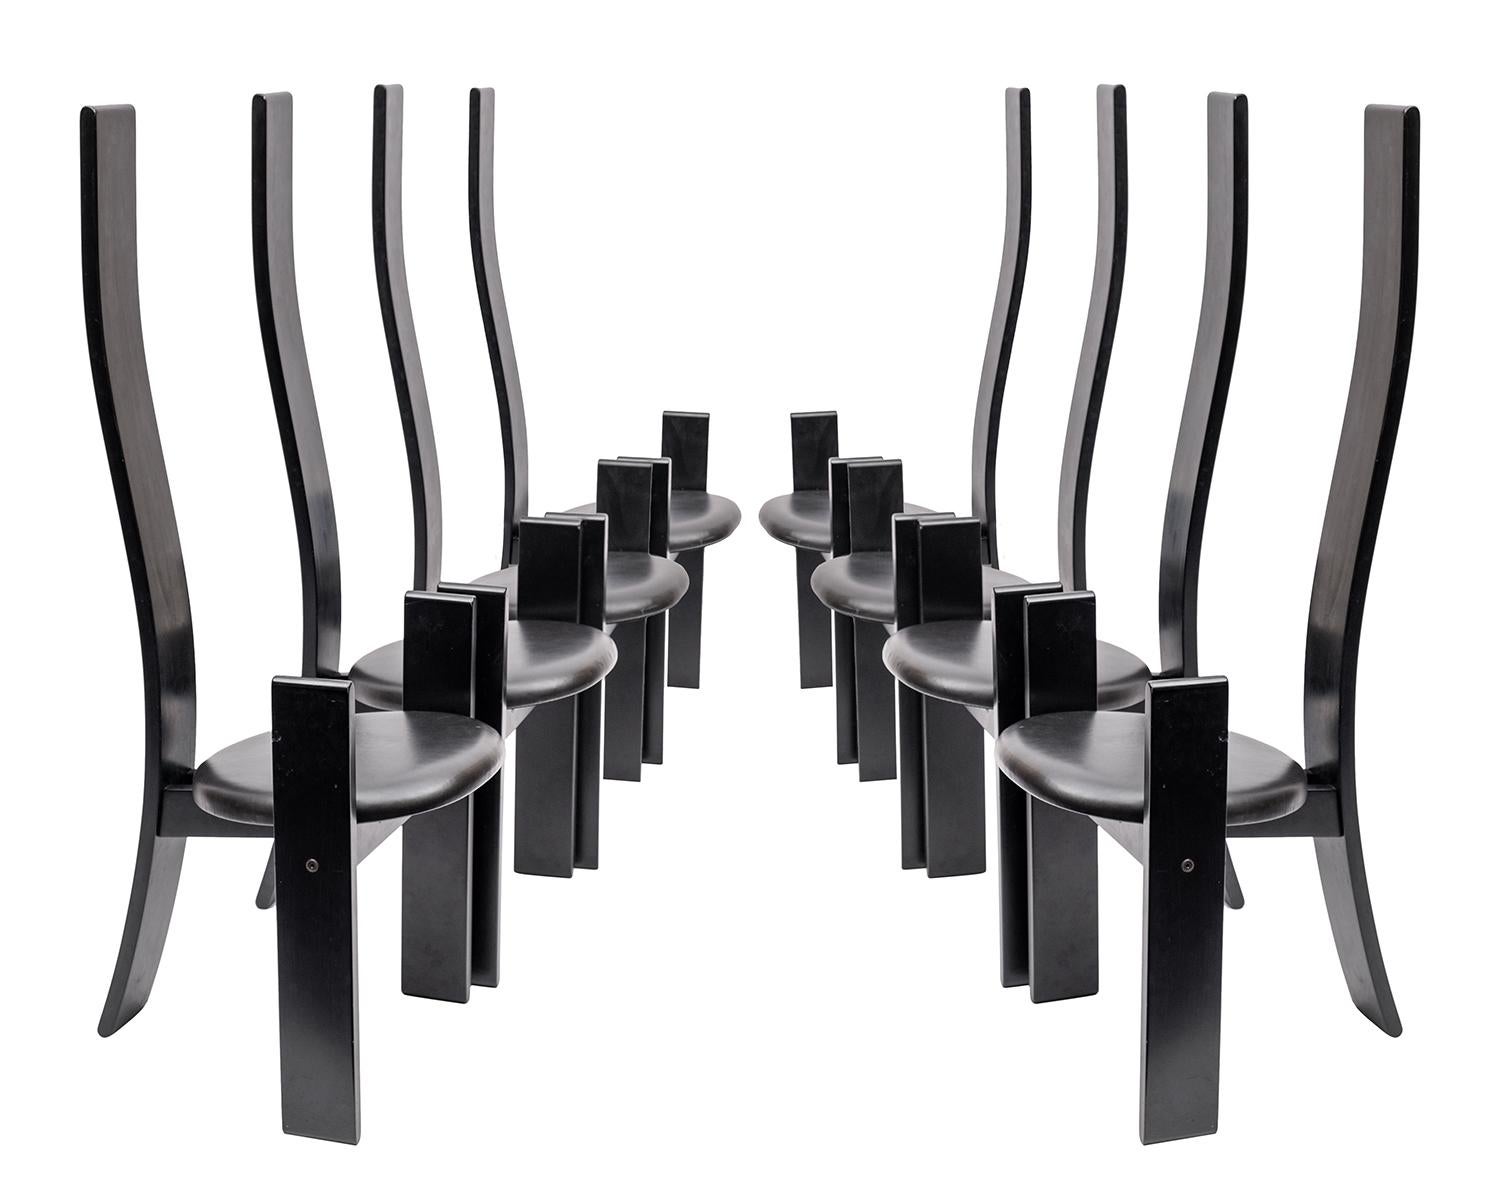 Set of 4 dining chairs model 'Golem' designed by Vico Magistretti for Poggi.

The chairs are made of black lacquered wood and upholstered with black skai.

Beautiful slim and modern design.

Good condition, normal age related wear particularly on